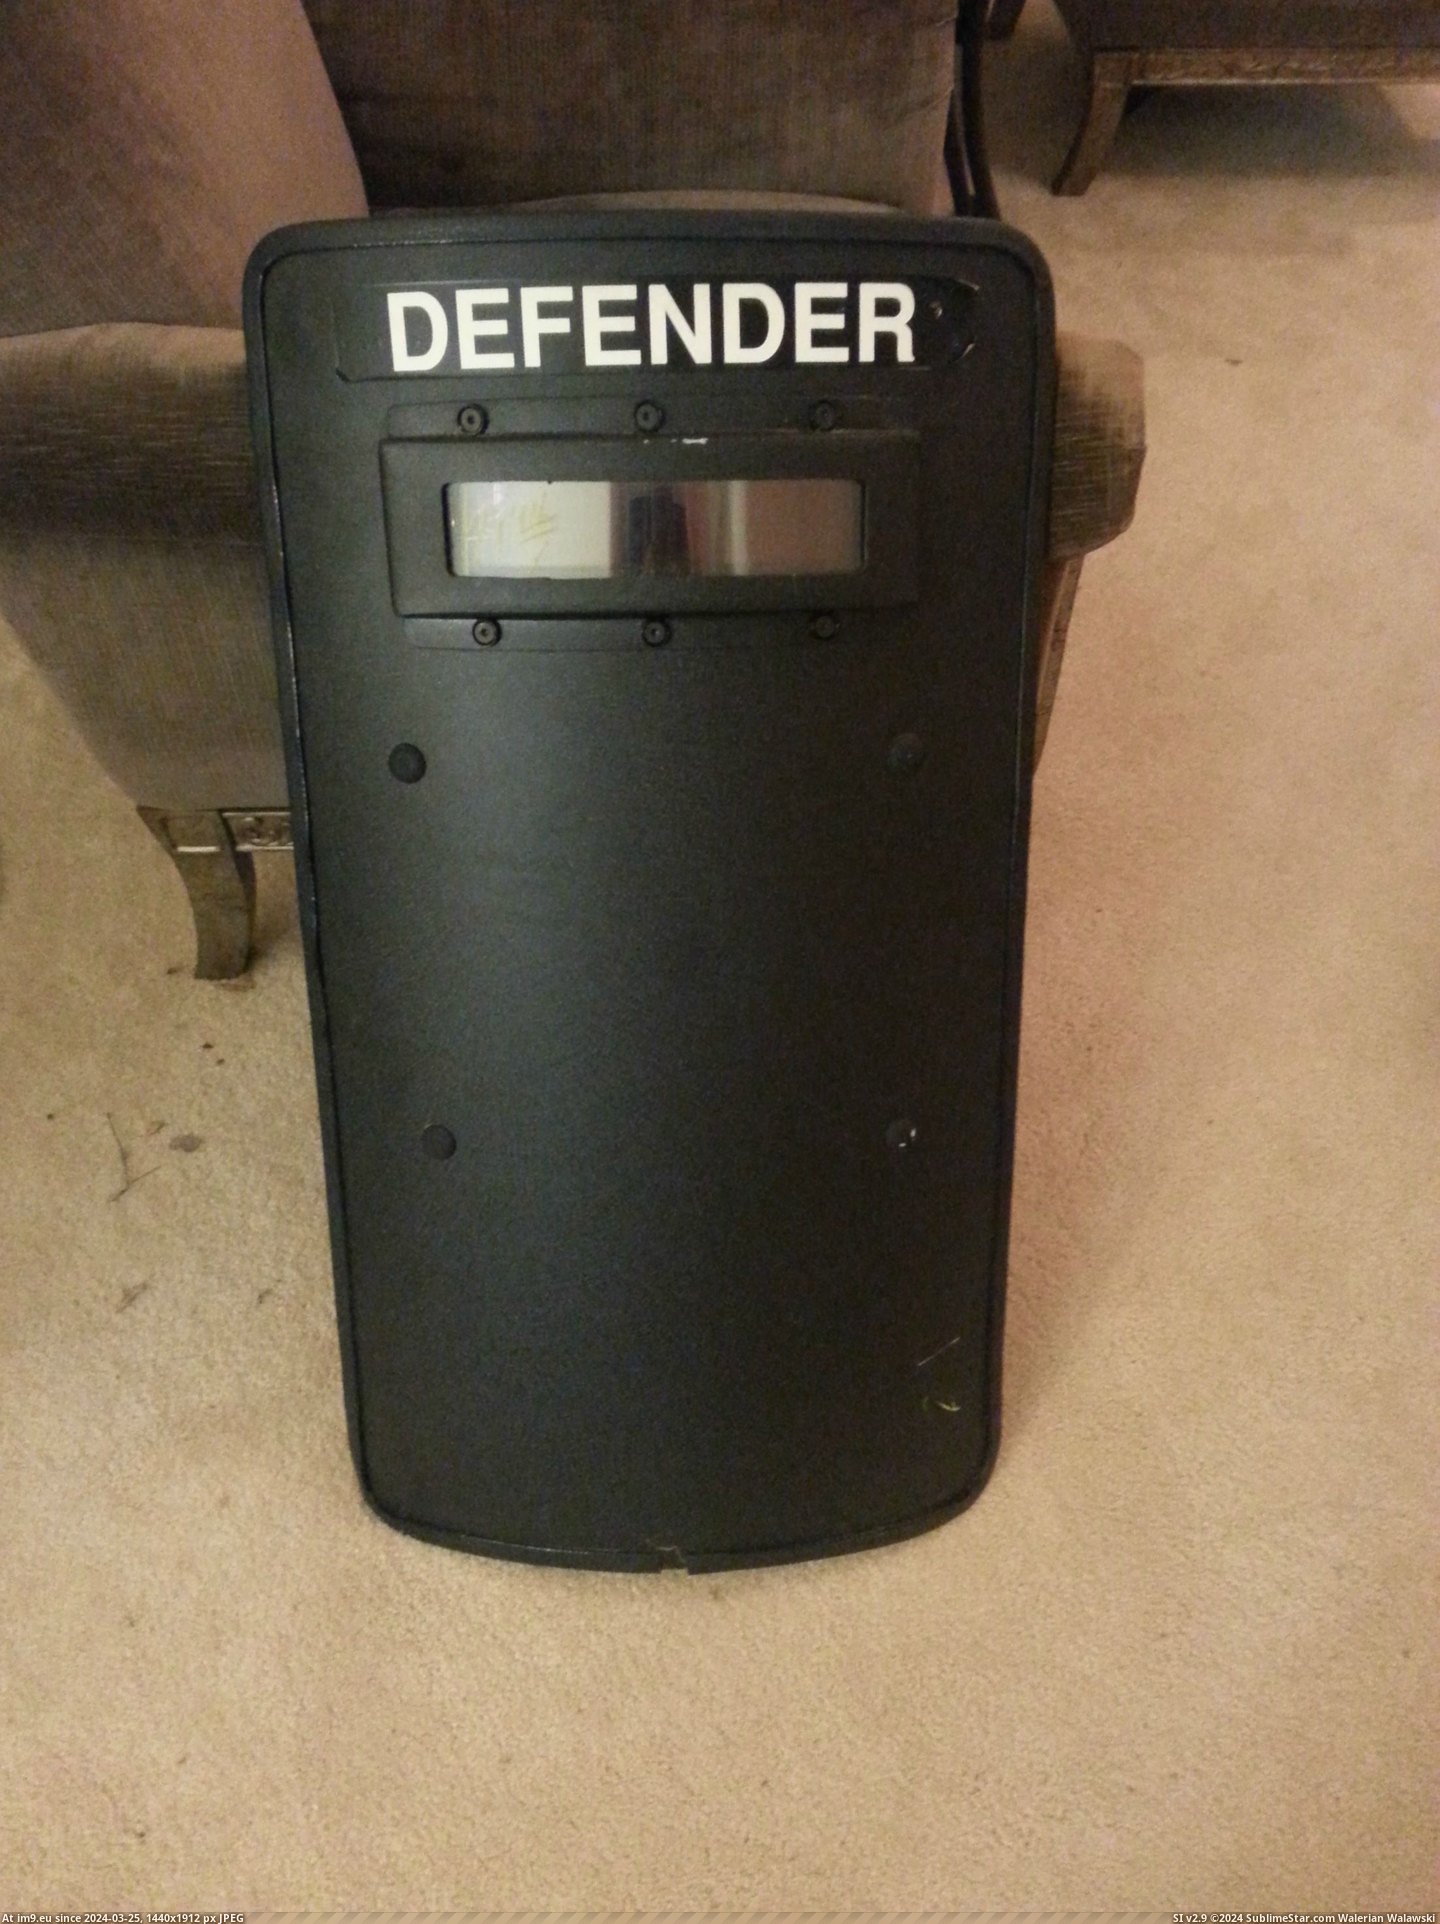 #Awesome #Find #Give #Riot #Shield #Resistant #Completely #Bullet #Goodwill [Pics] My awesome $40 Goodwill find: 'Completely bullet resistant' riot shield. Who would give this away? 4 Pic. (Image of album My r/PICS favs))